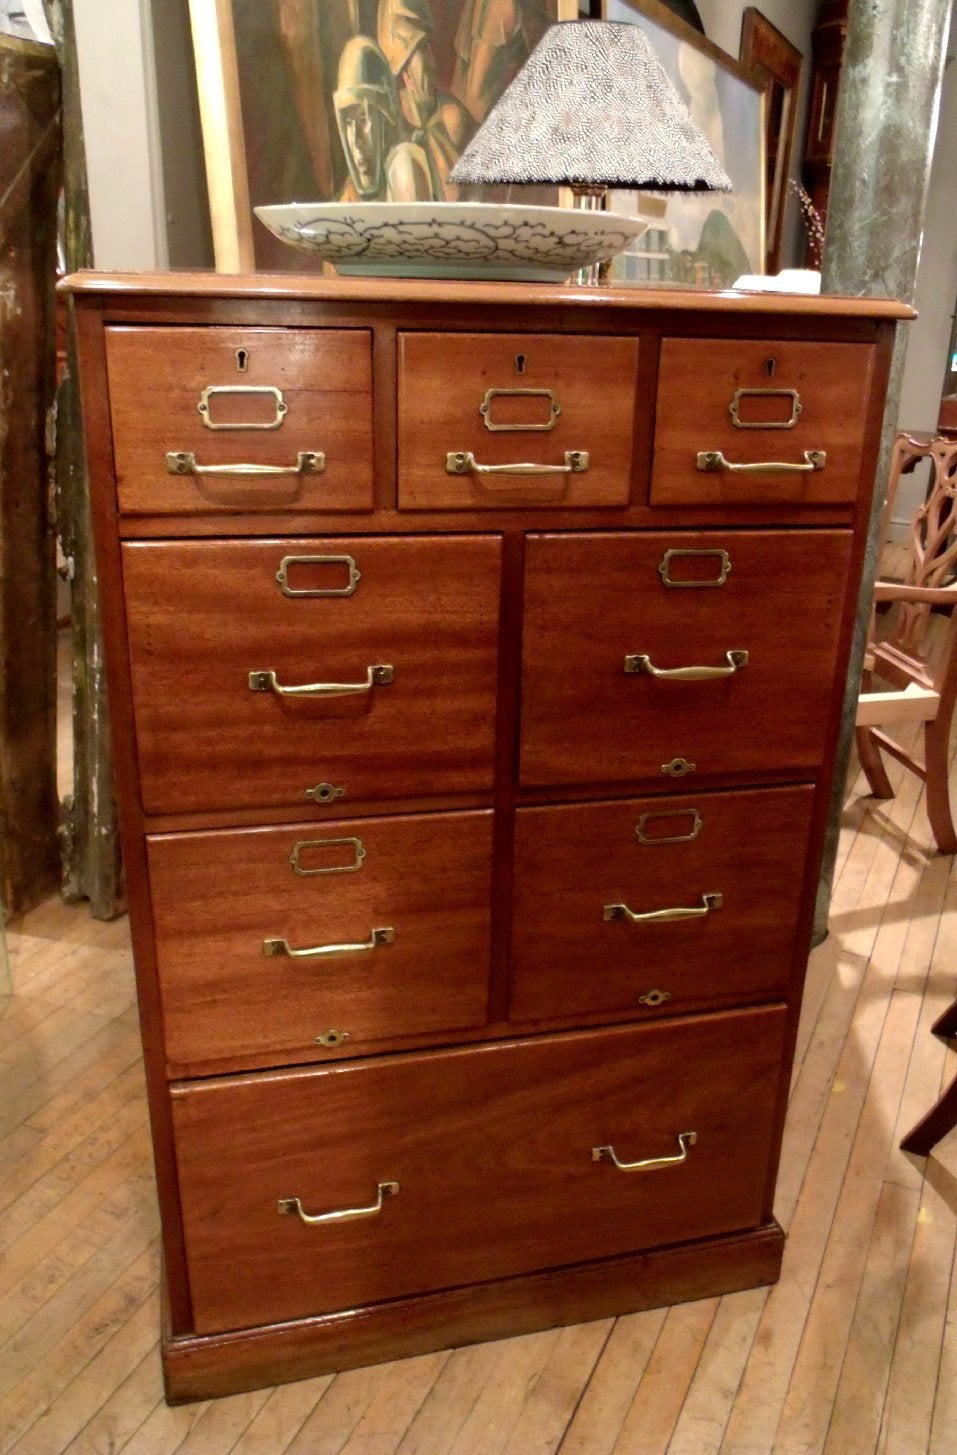 This excellent quality and wonderfully paginated mahogany filing cabinet features brass hardware and trim in a well-proportioned size. There are 4 central good sized file drawers between 3 smaller drawers on top and a large, deep bottom drawer. The